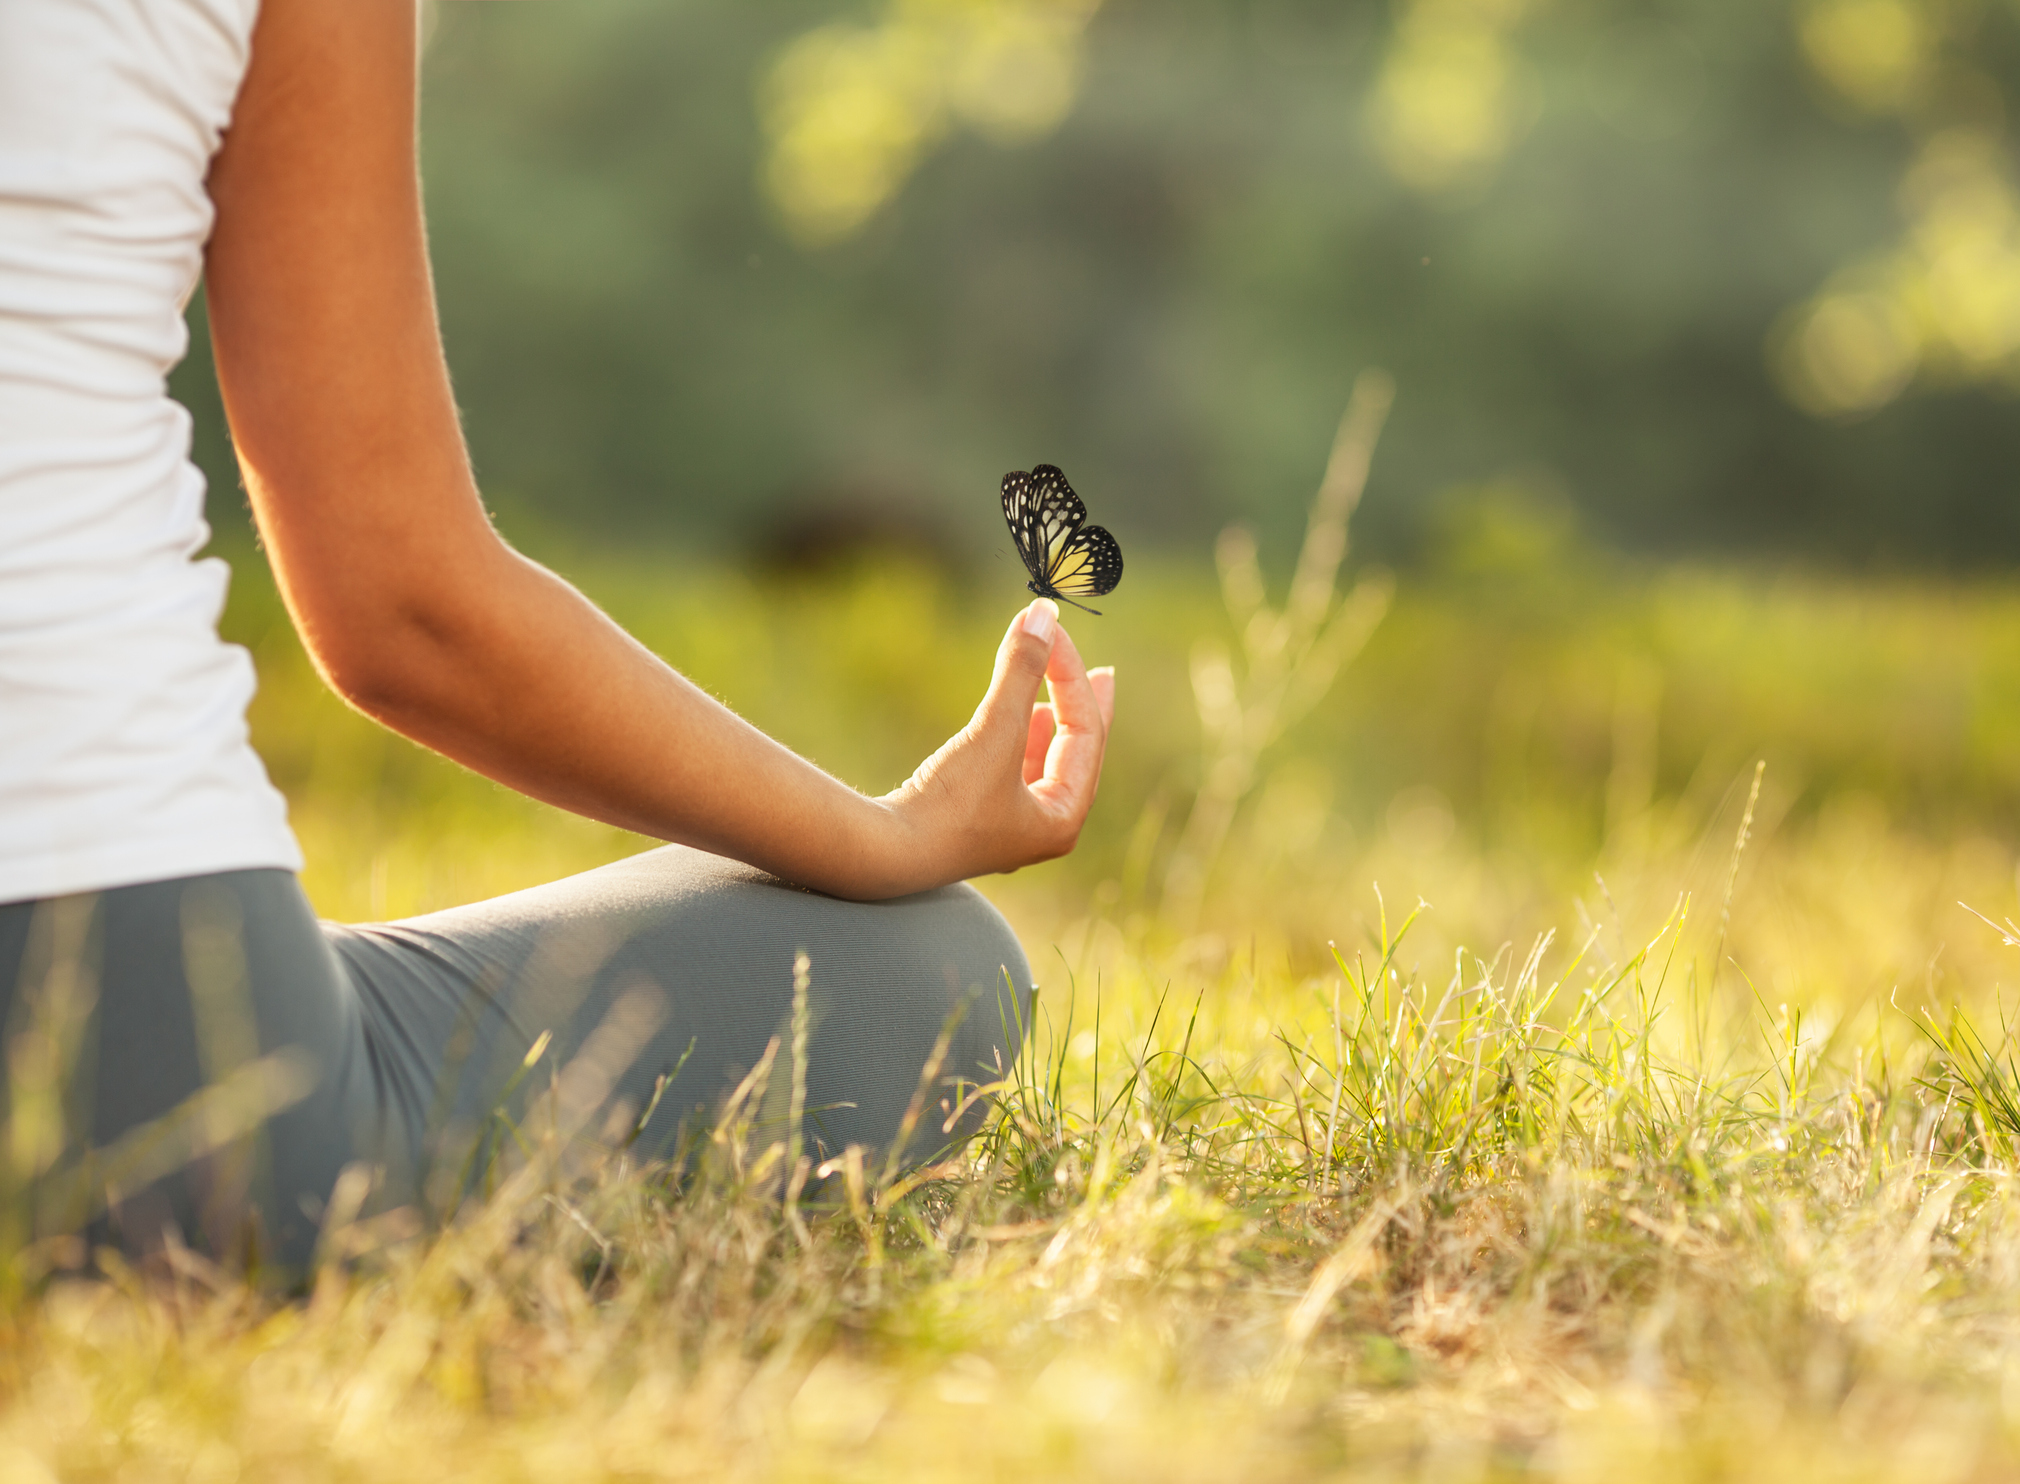 A cropped photo of a woman meditating.  There is a black and yellow swallowtail butterfly perched on the tips of the fingers of her right hand.  She is wearing gray yoga pants and a white shirt.  She is sitting in the grass.  Only the right side of her body is visible.  Her wrist is resting on her knee with the palm of her hand turned up.  The sun is shining.  A blurred image of greenery is visible in the background of the photo.  The grass is standing up, and each blade is of a different height.